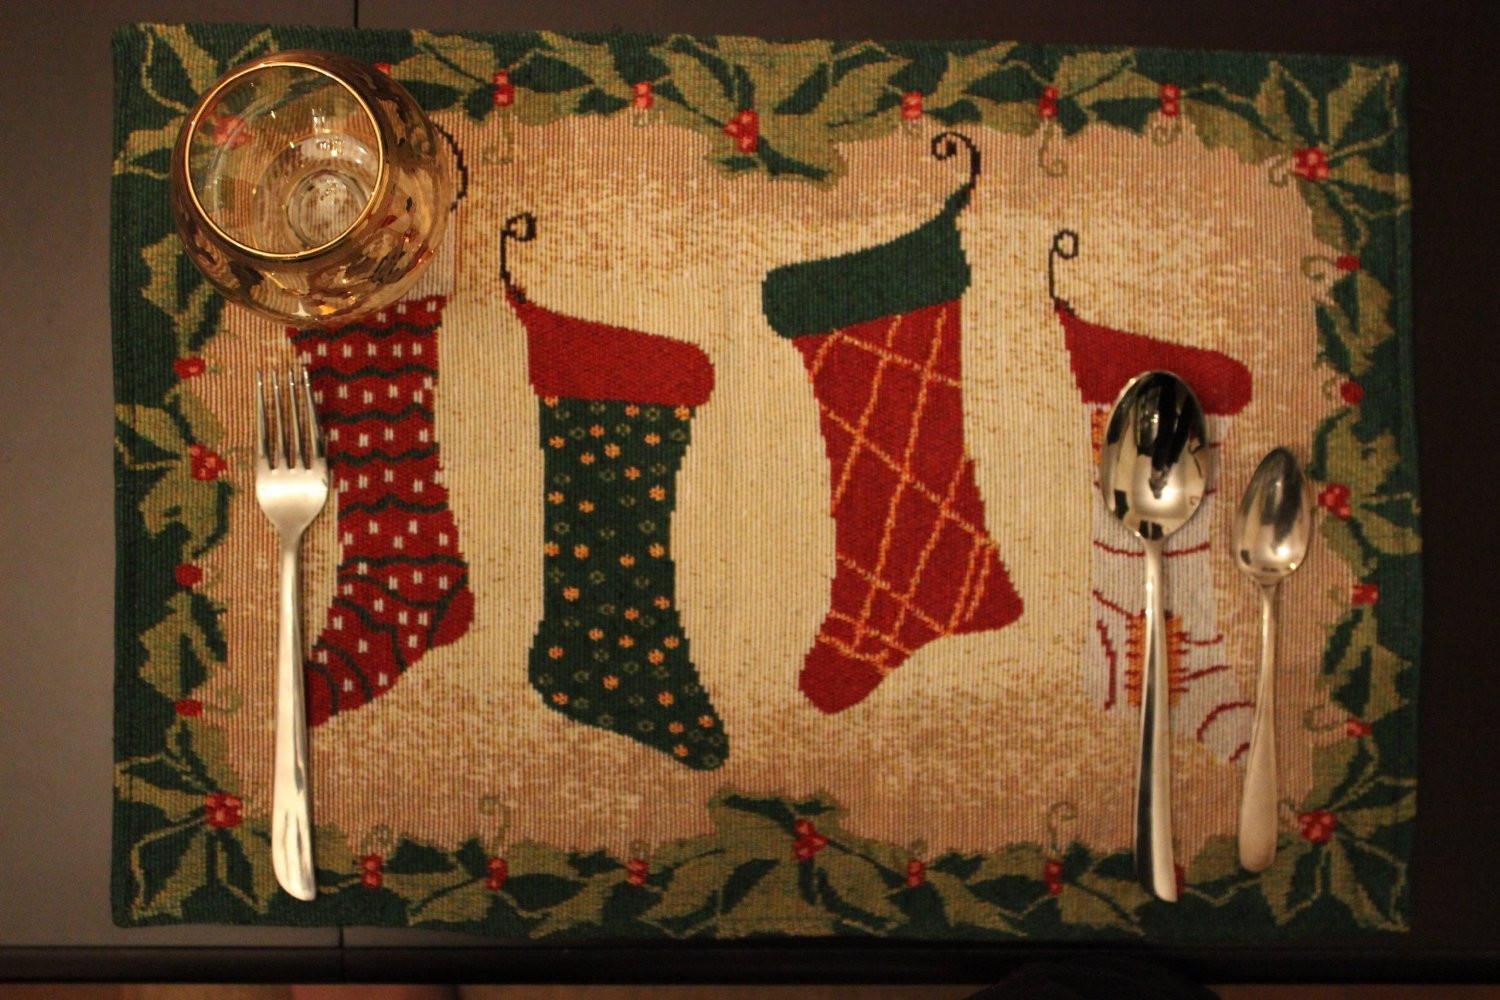 Tache Festive Hang My Stockings By the Fireplace Placemat Set of 4 (12910PM) - Tache Home Fashion